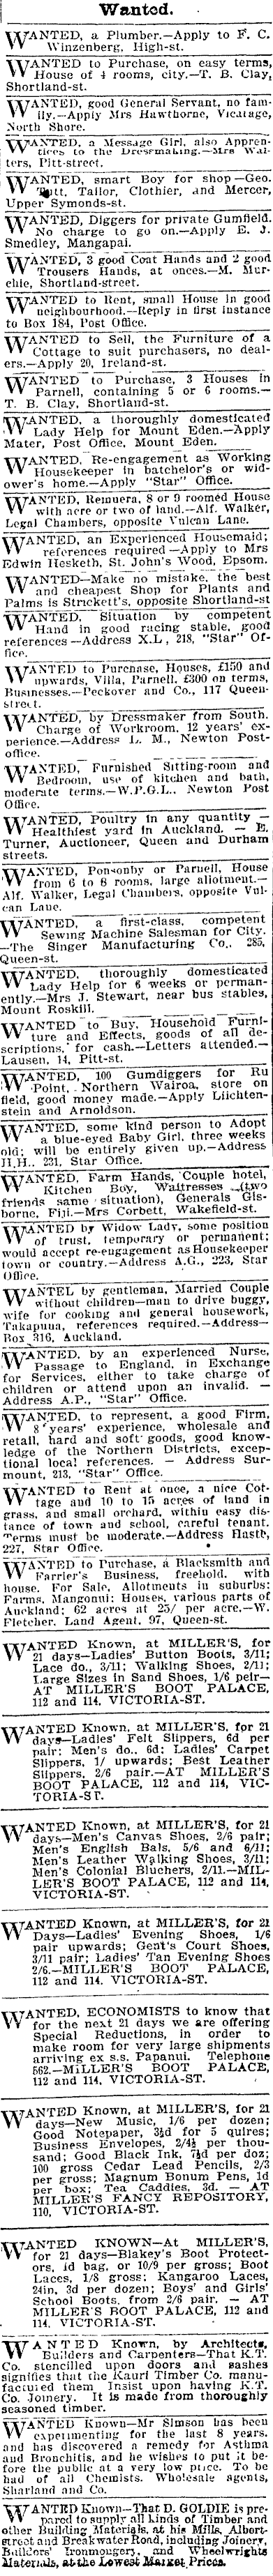 Papers Past | Newspapers | Auckland Star | 23 September 1899 | Page 1  Advertisements Column 7